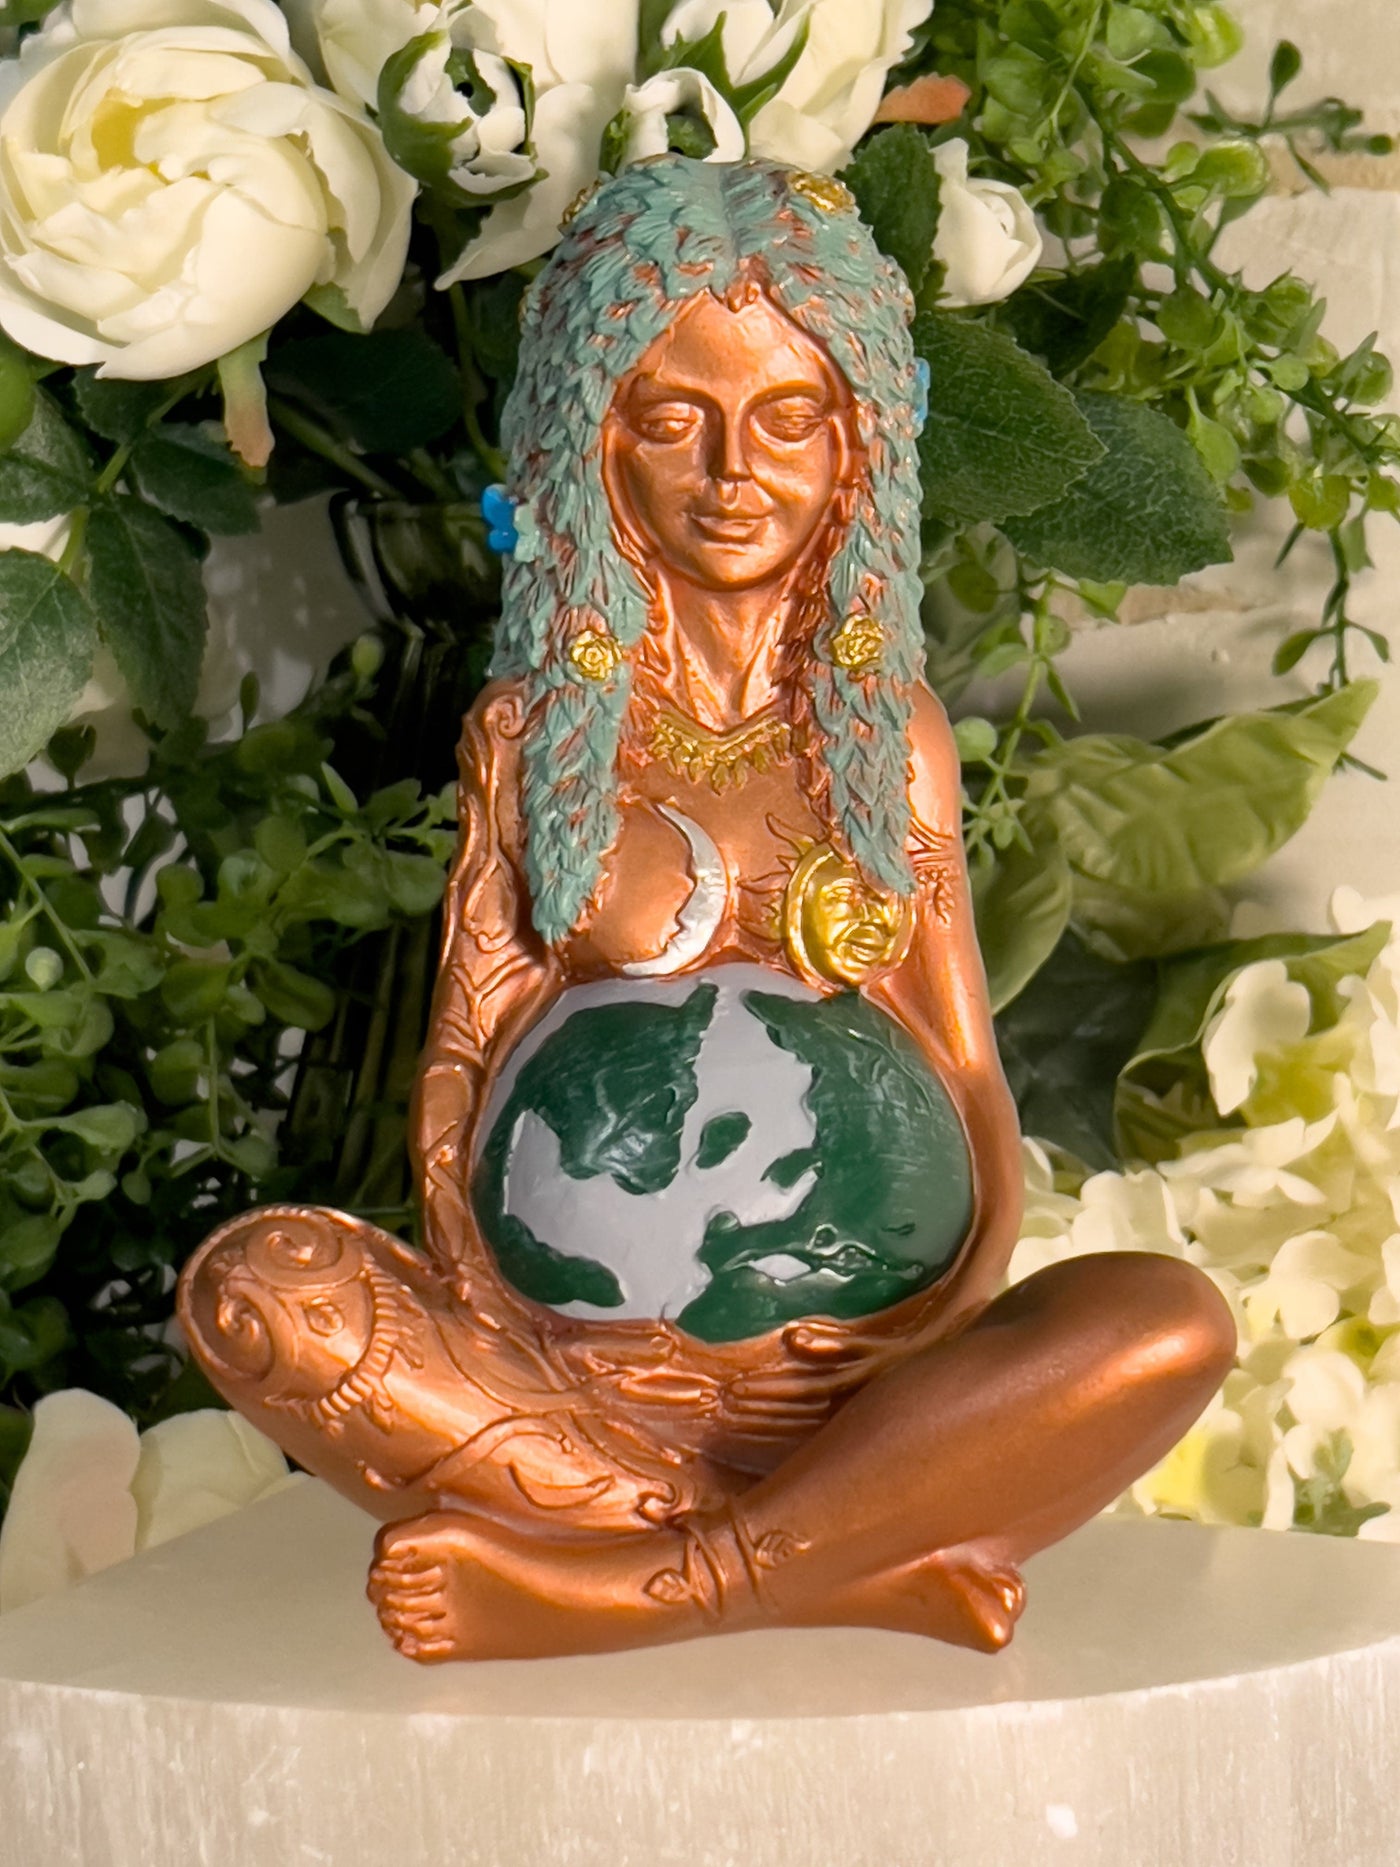 MOTHER EARTH STATUE Revive In Style Vintage Furniture Painted Refinished Redesign Beautiful One of a Kind Artistic Antique Unique Home Decor Interior Design French Country Shabby Chic Cottage Farmhouse Grandmillenial Coastal Chalk Paint Metallic Glam Eclectic Quality Dovetailed Rustic Furniture Painter Pinterest Bedroom Living Room Entryway Kitchen Home Trends House Styles Decorating ideas